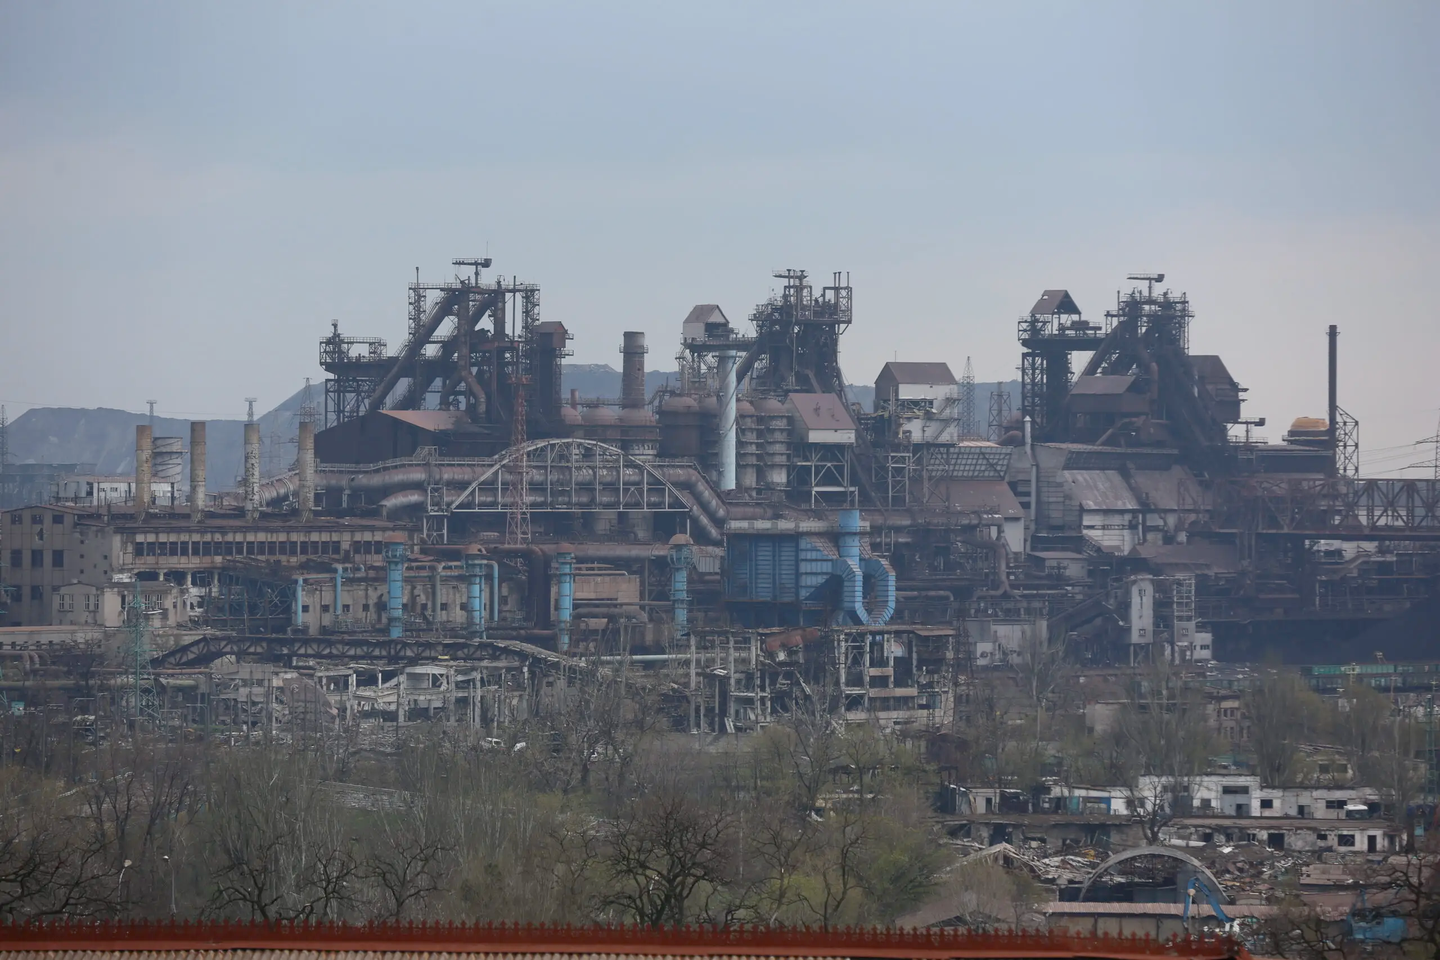 The defenders of Mariupol, who are holding out at the Azovstal steel plant, say they will never surrender. (<em>Photo by Leon Klein/Anadolu Agency via Getty Images</em>)